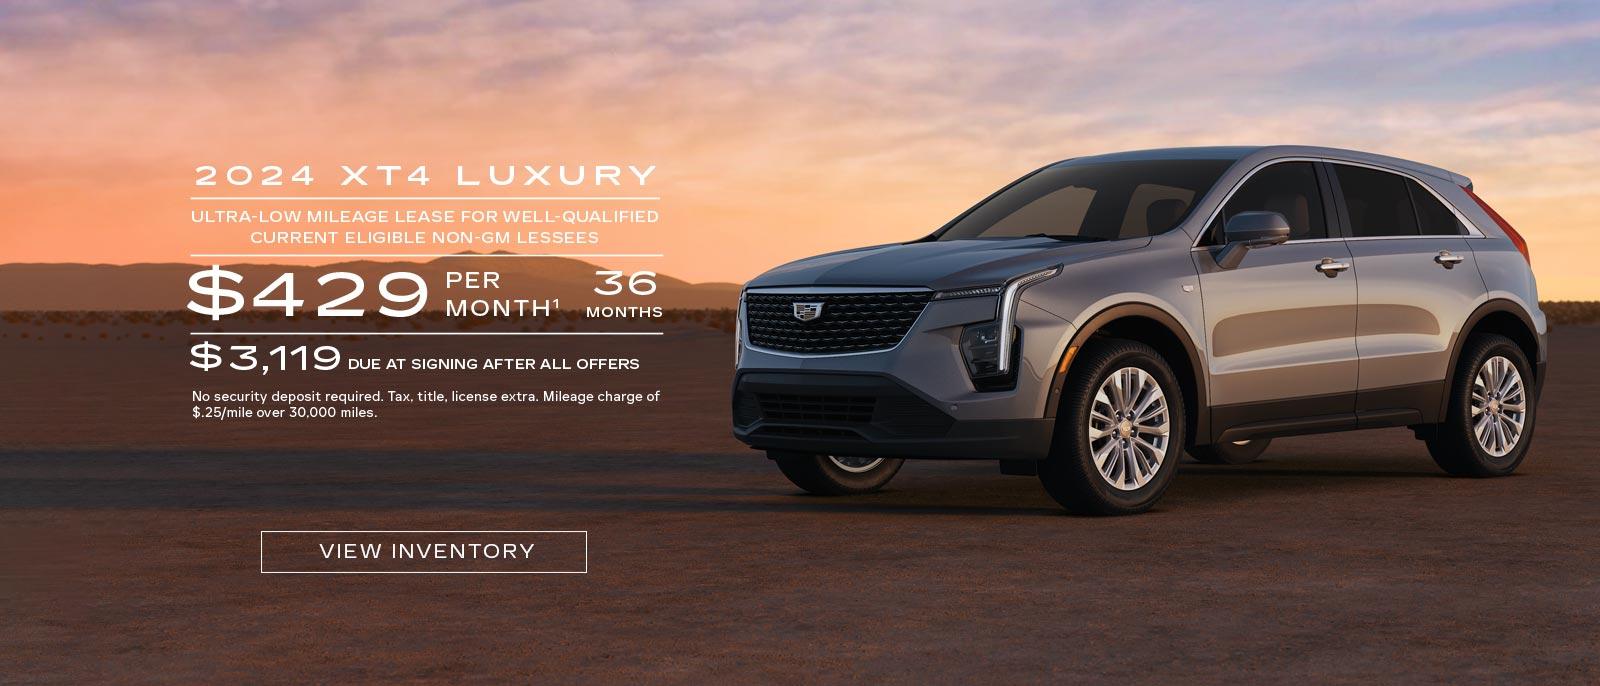 2024 XT4 Luxury. Ultra-low mileage lease for well-qualified current eligible Non-GM Lessees. $429 per month. 36 months. $3,119 due at signing after all offers.